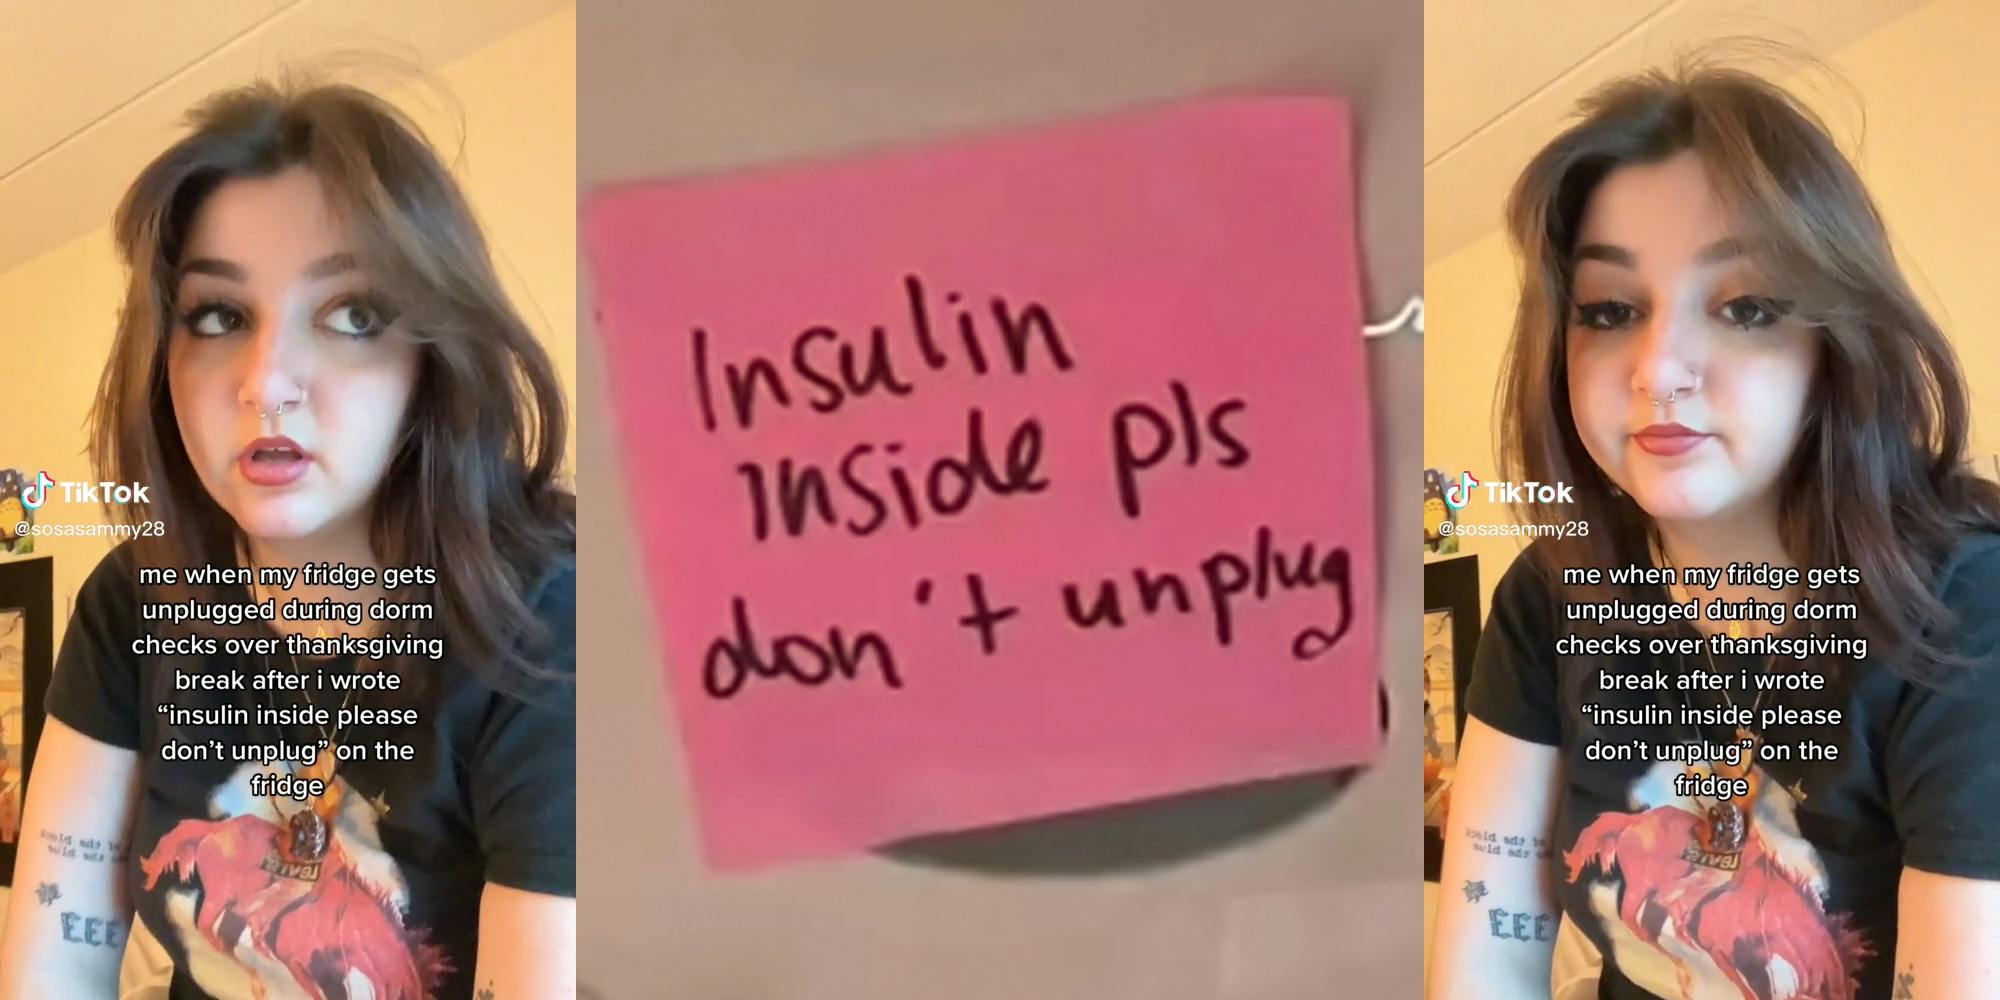 young woman with caption "me when my fridge gets unplugged during dorm checks over thanksgiving break after i wrote 'insulin inside please don't unplug' on the fridge" (l&r) pink sticky note with handwritten "Insulin inside pls don't unplug" (c)